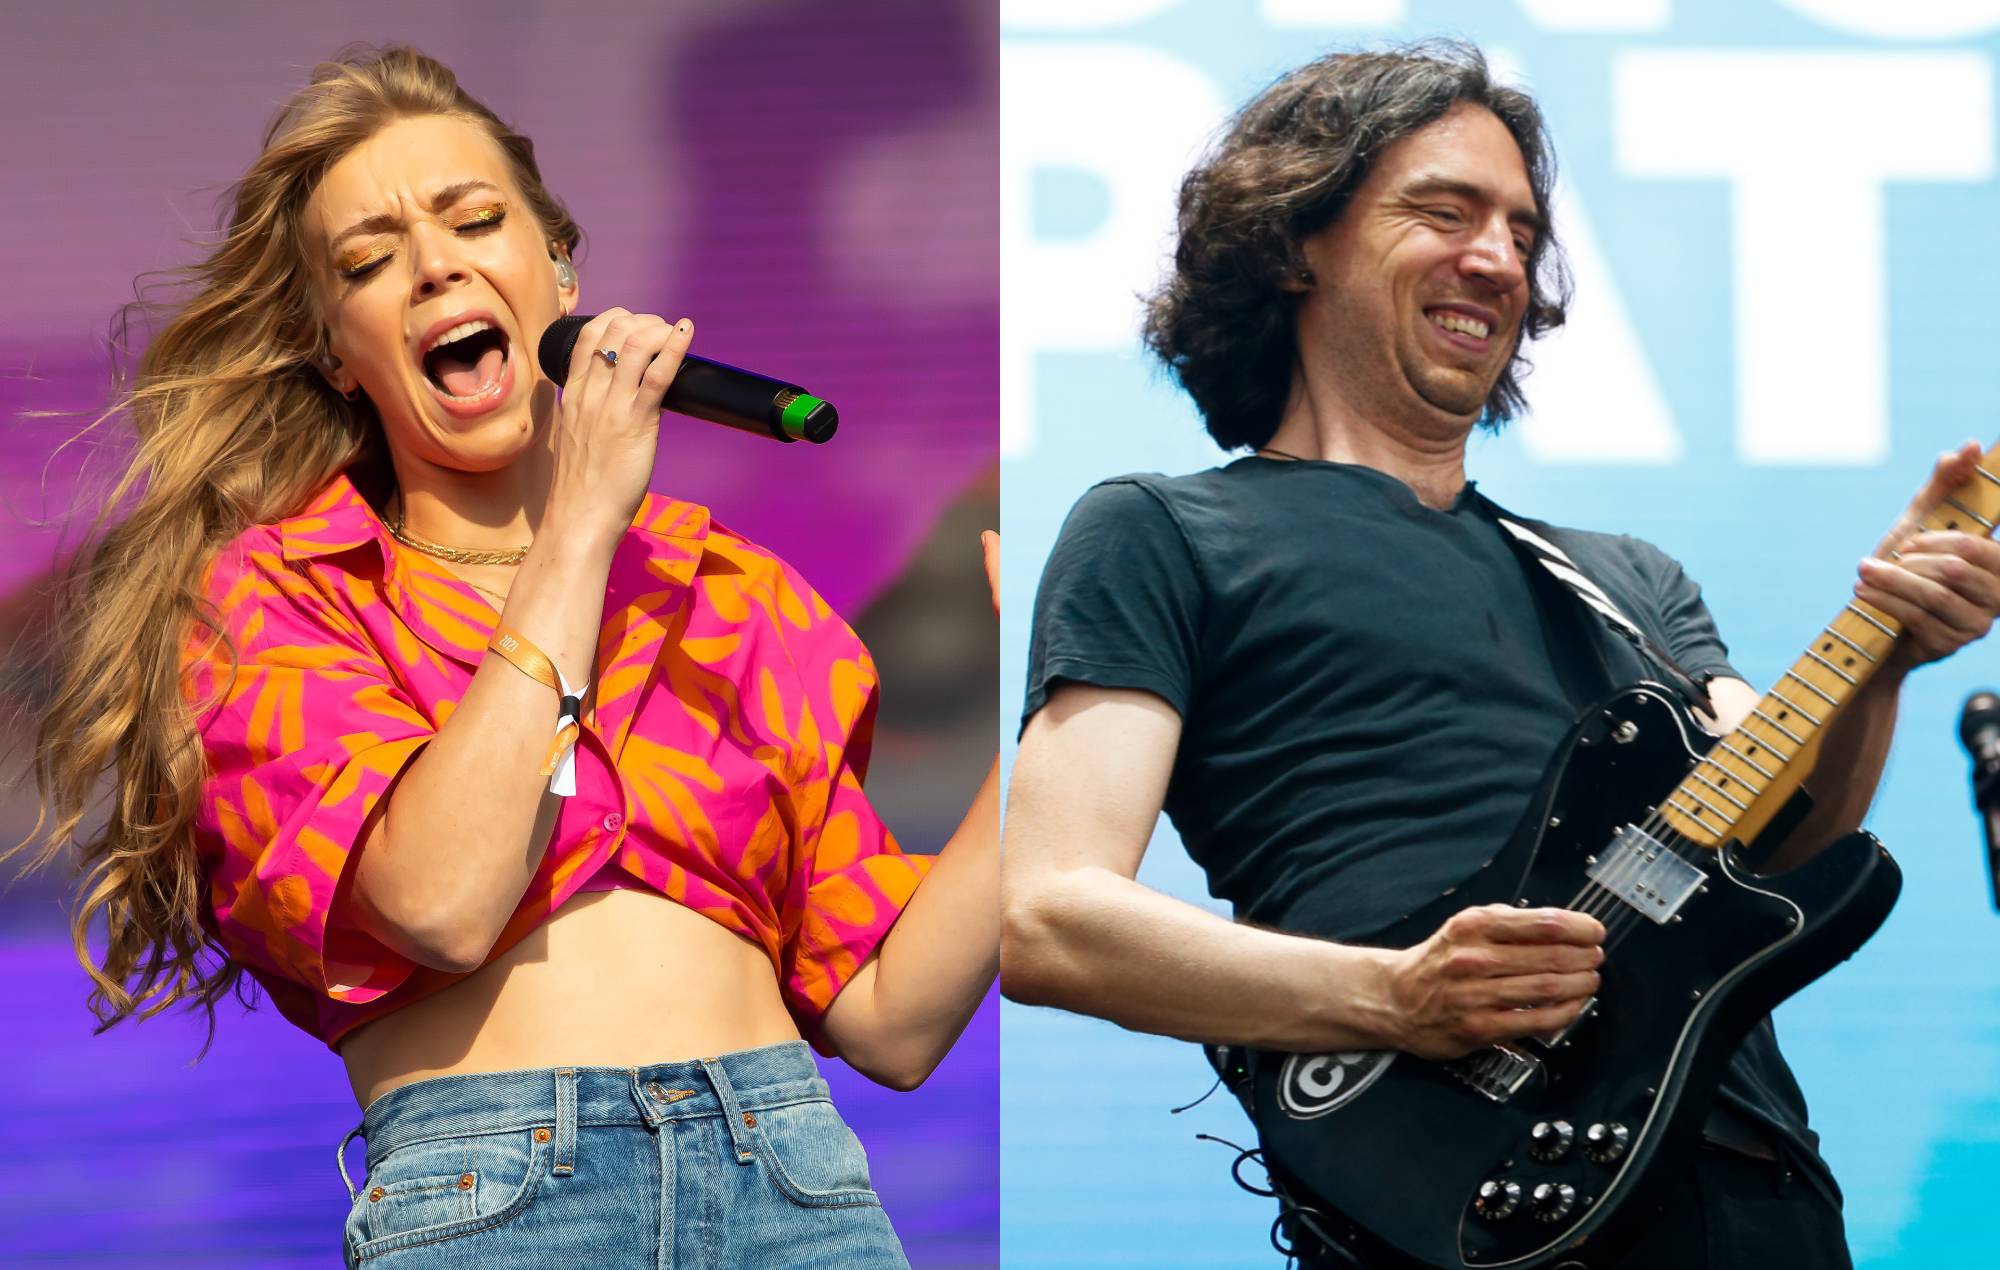 Becky Hill and Snow Patrol. Credit: Jonny Weeks and Alexandre Schneider via getty